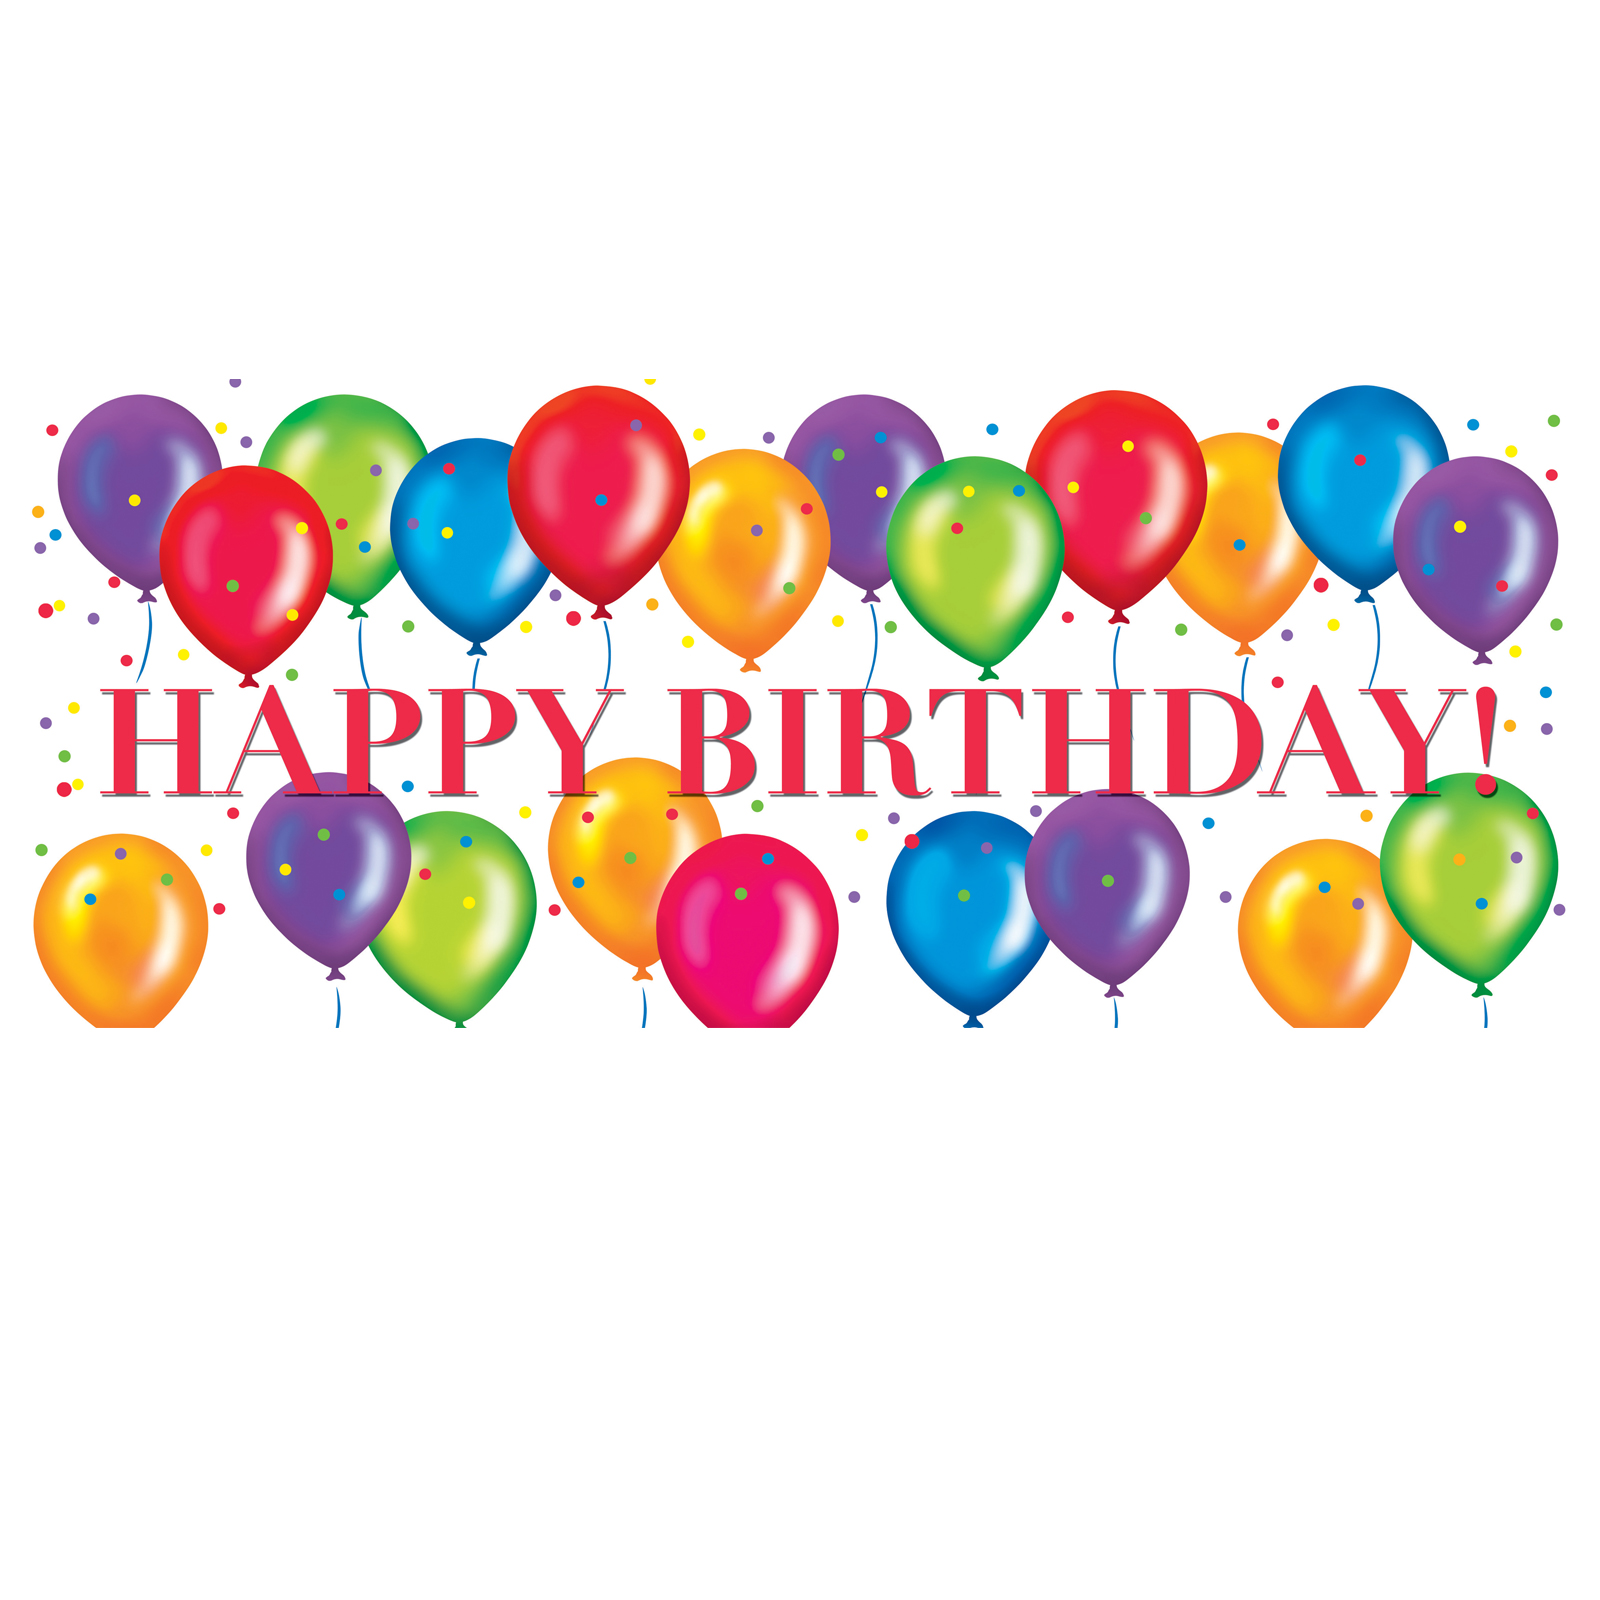 22 Birthday Balloons Clip Art Free Cliparts That You Can Download To